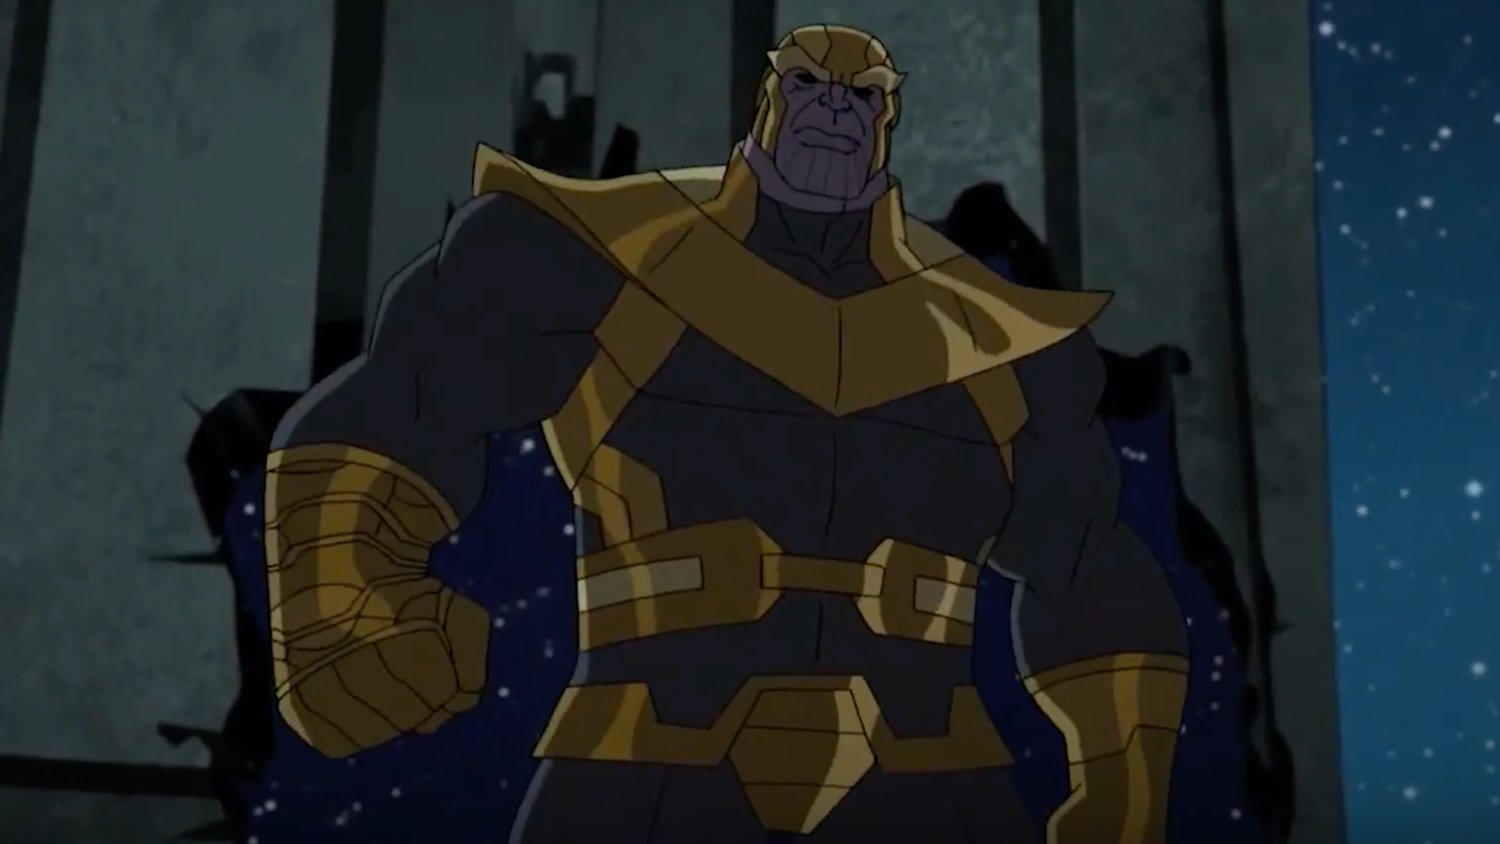 The Latest Trailer For AVENGERS: INFINITY WAR Gets an Animated Mashup  Trailer — GeekTyrant